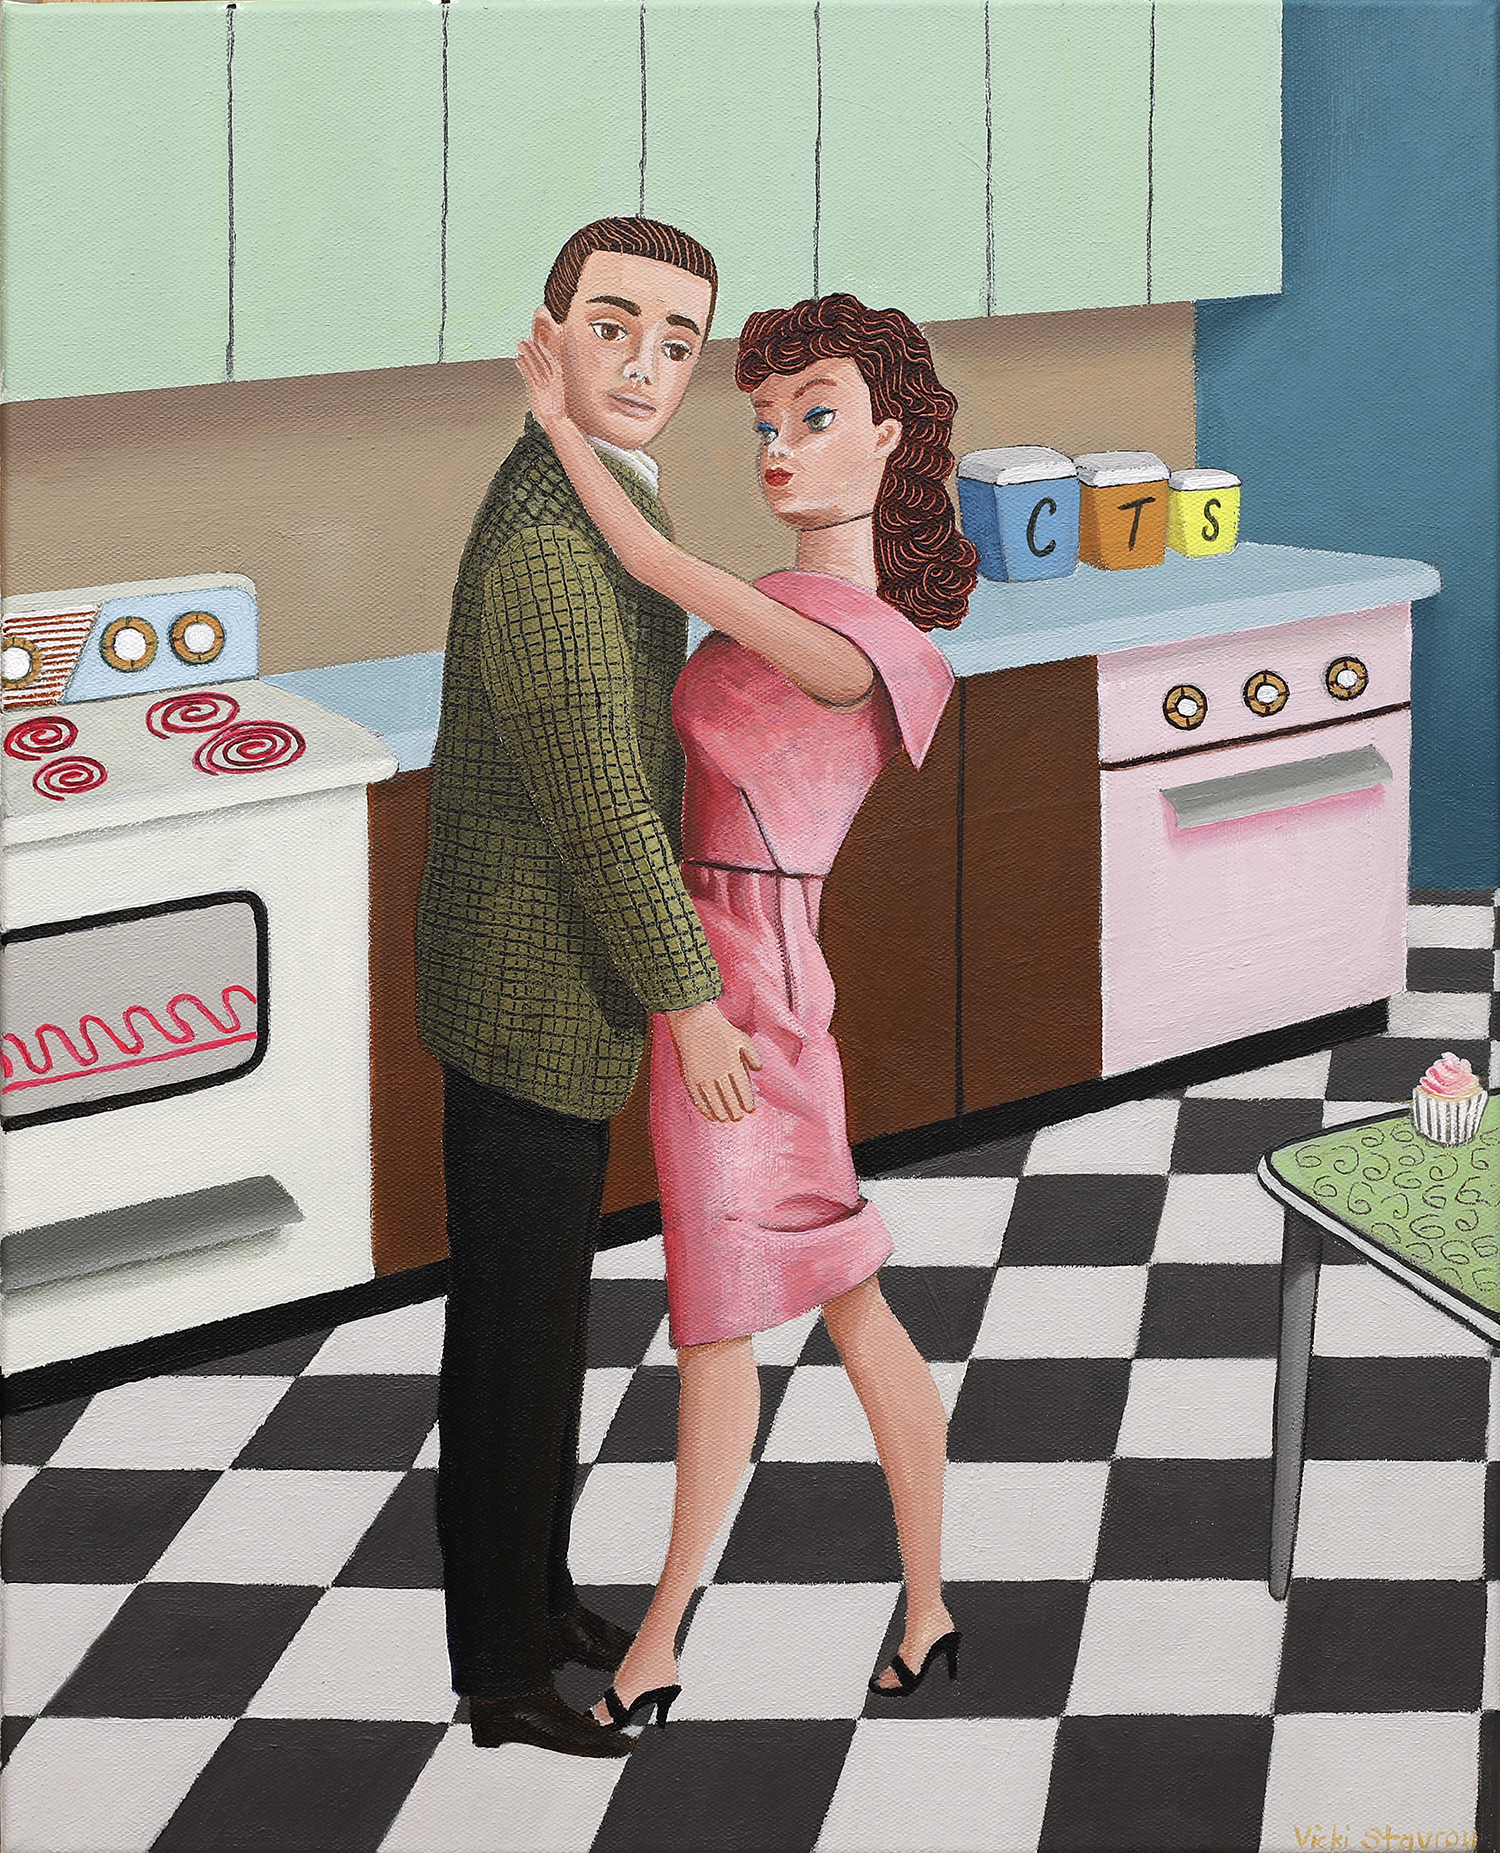 Welcome Home Darling - Barbie and Ken's Domestic Bliss by Vicki Stavrou | Clayton Utz Art Award 2023 Finalists | Lethbridge Gallery